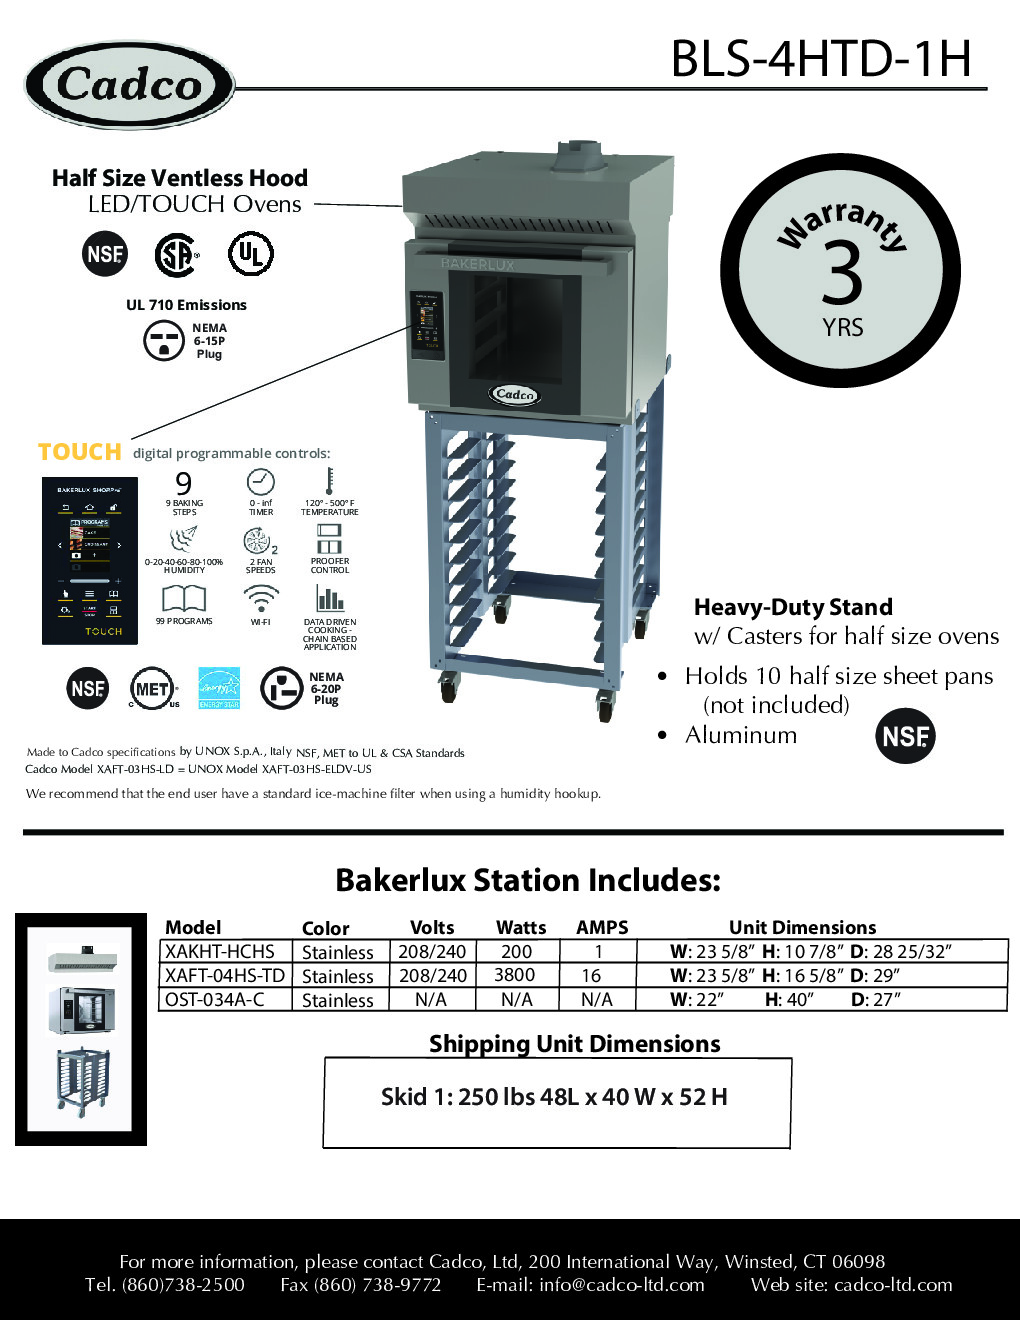 Cadco BLS-4HTD-1H Single-Deck Electric Convection Oven w/ Digital Touch Controls, Half-Size